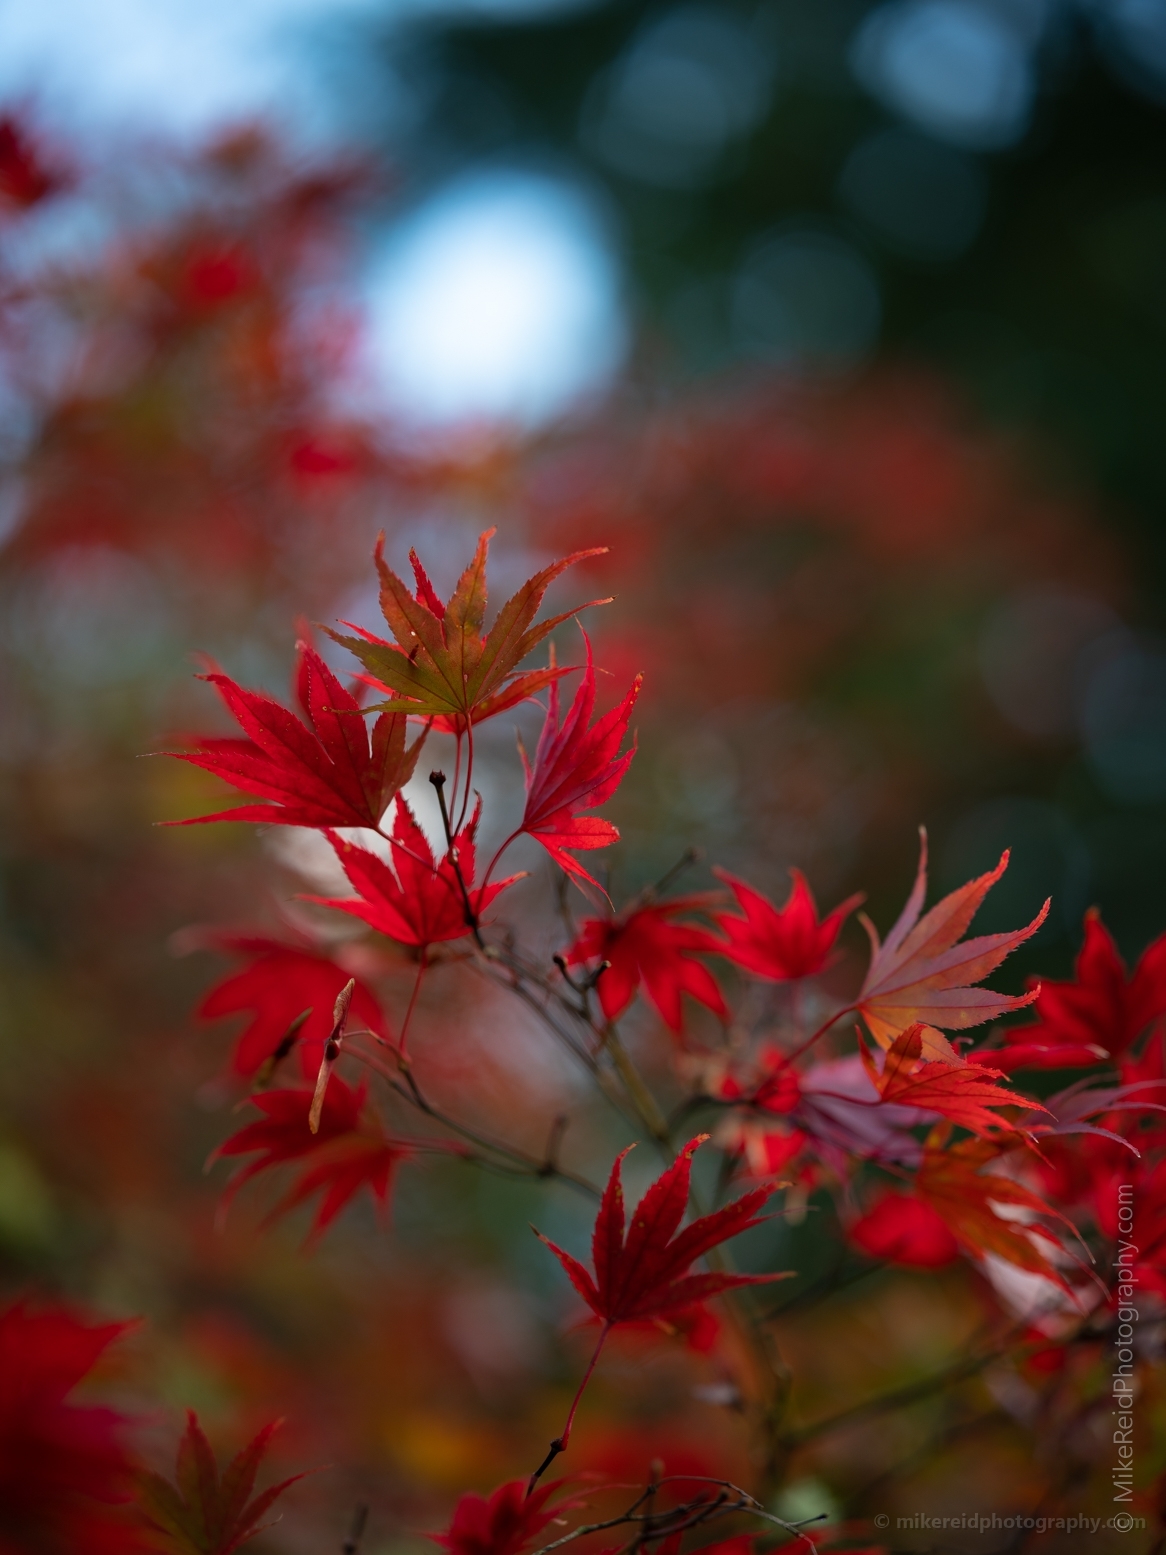 A Flourish of Japanese Maple Leaves in Red